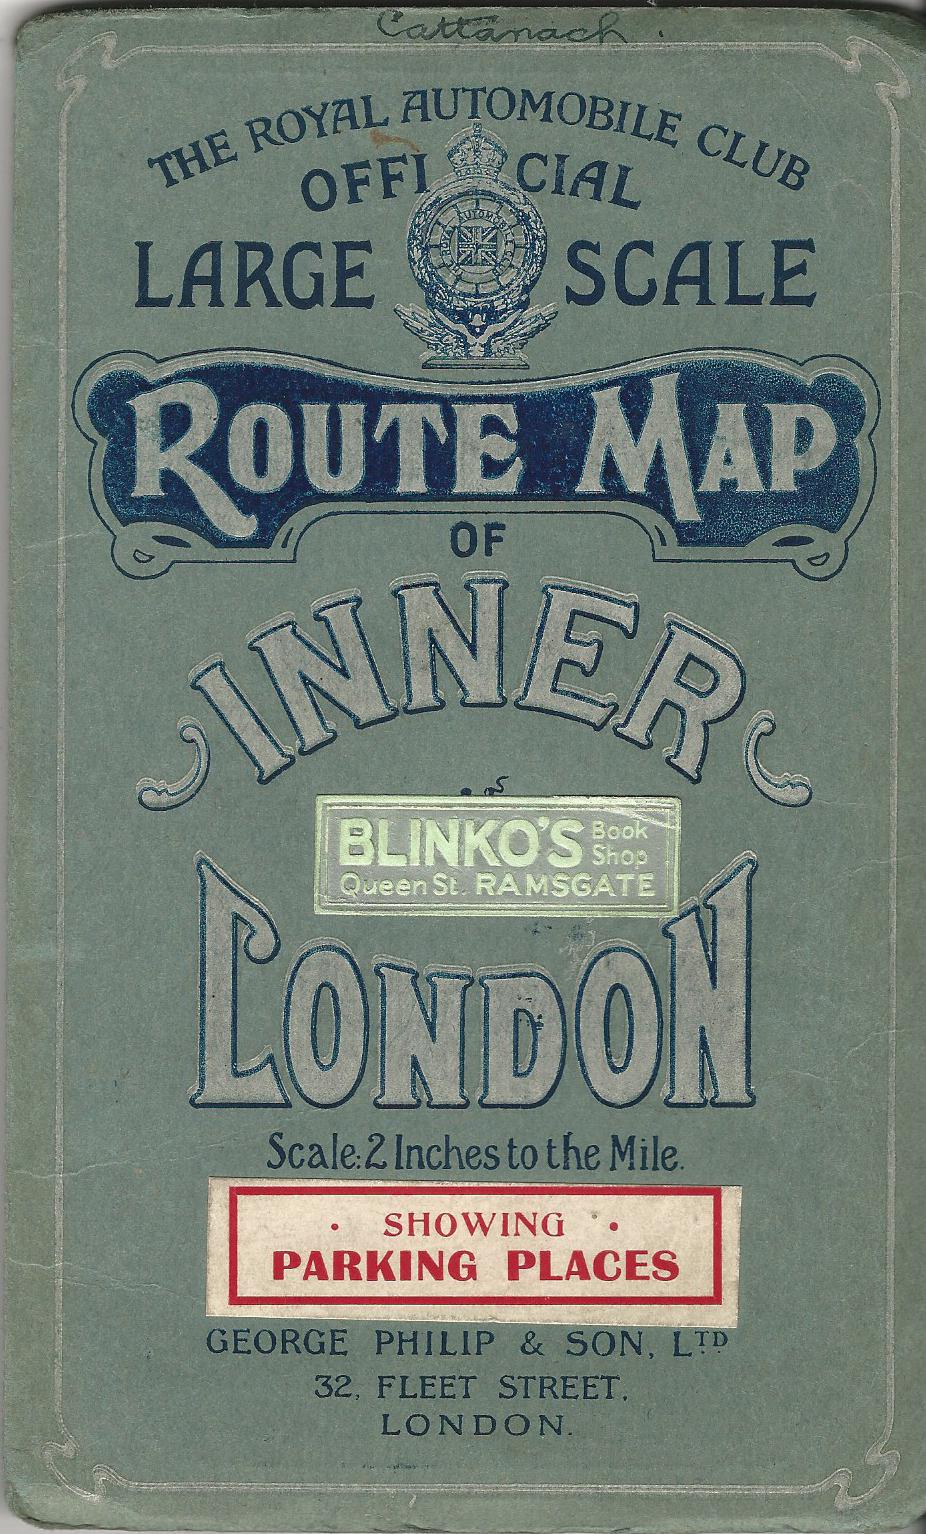 Image for The Royal Automobile Club: Official Route Map of Inner London, Scale: 2 Inches to the Mile.